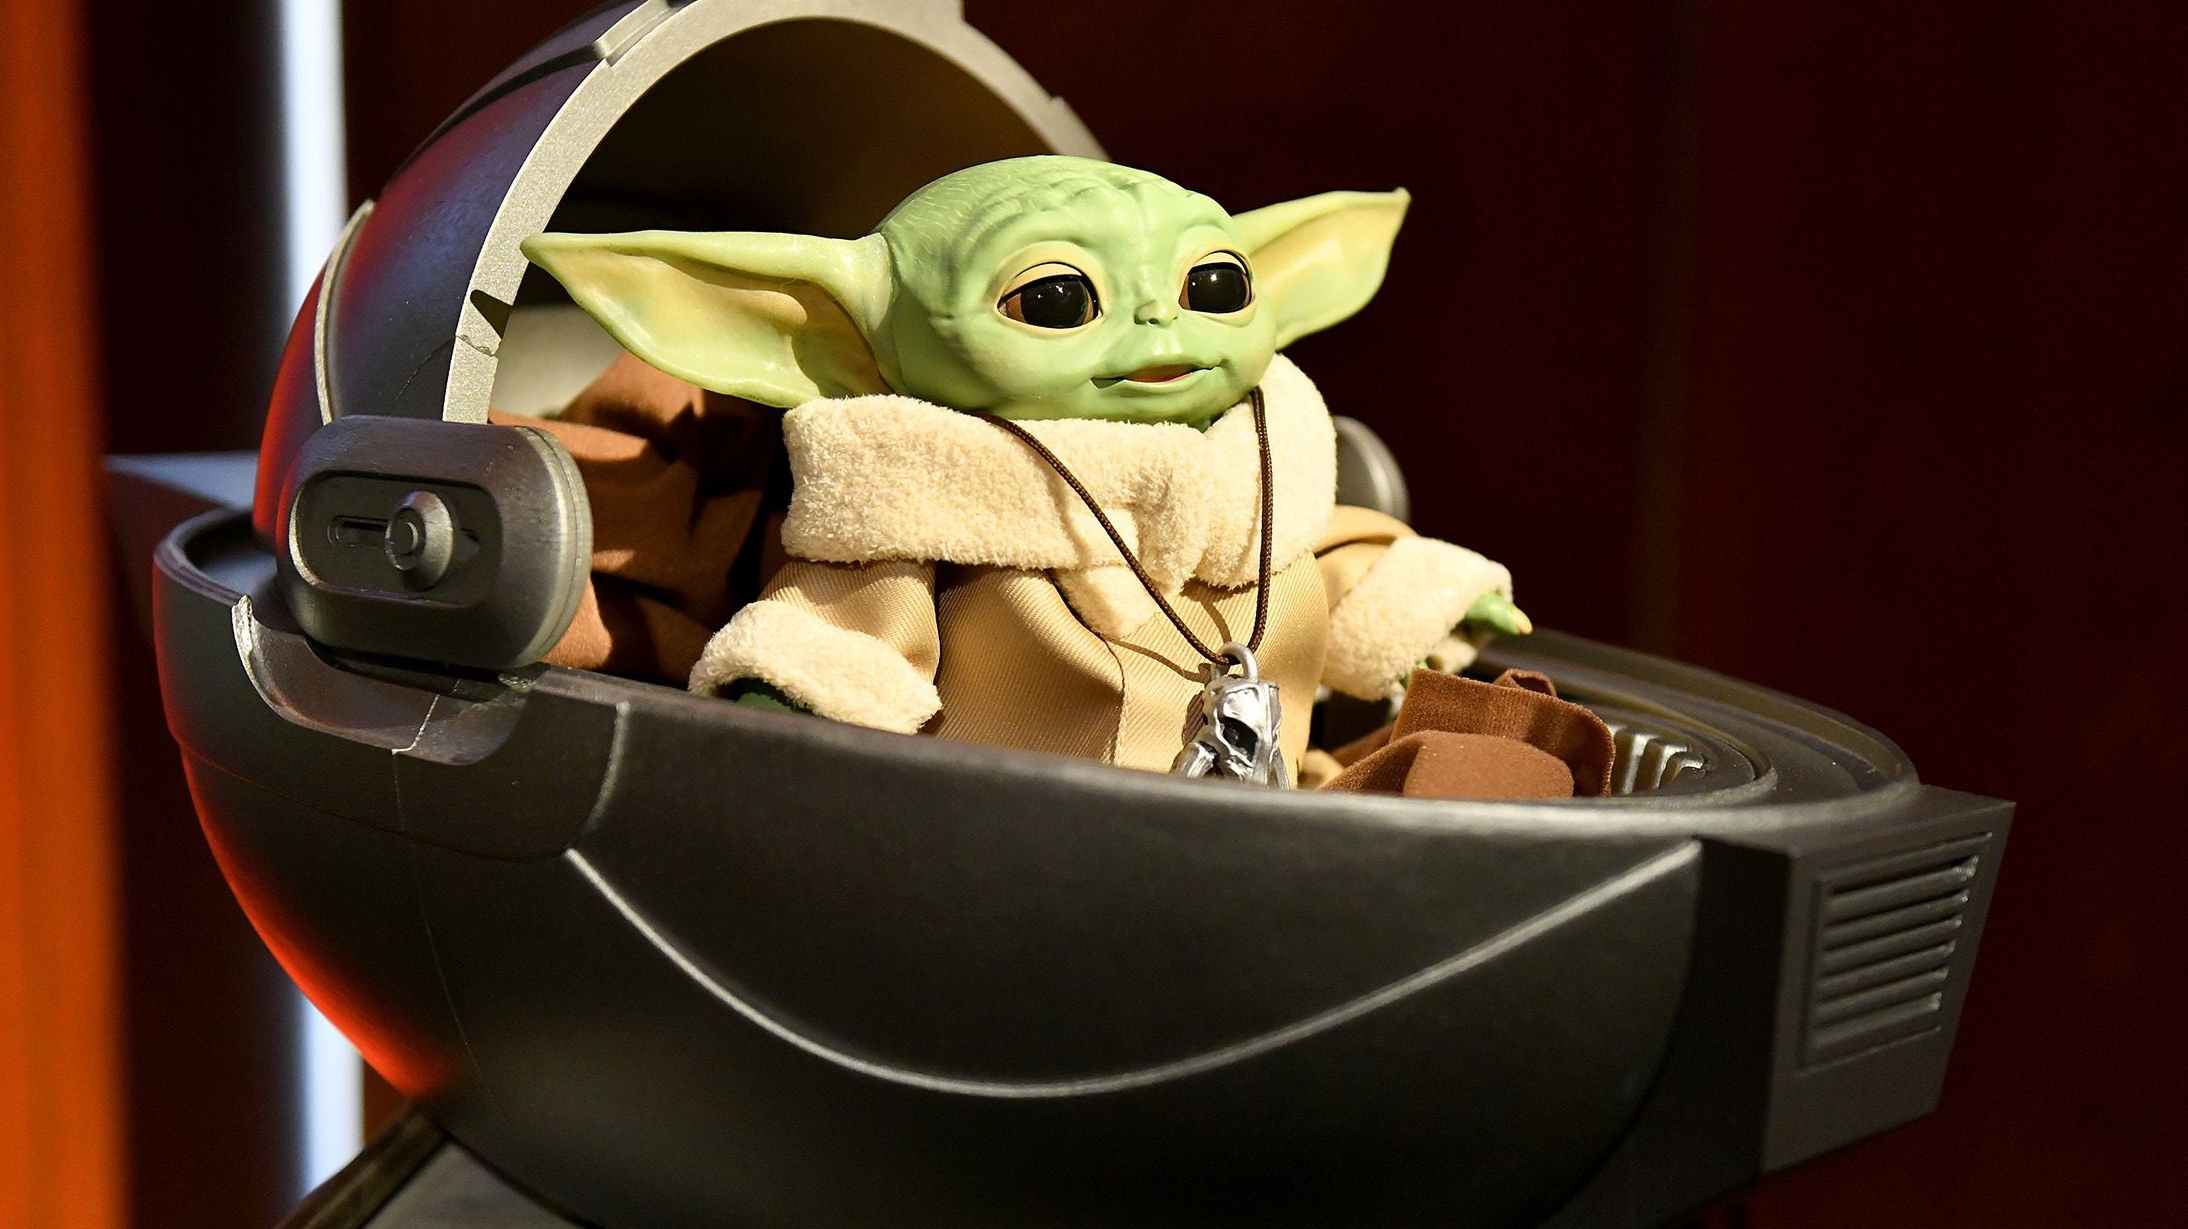 disney finally unveils baby yoda toys months after his tv